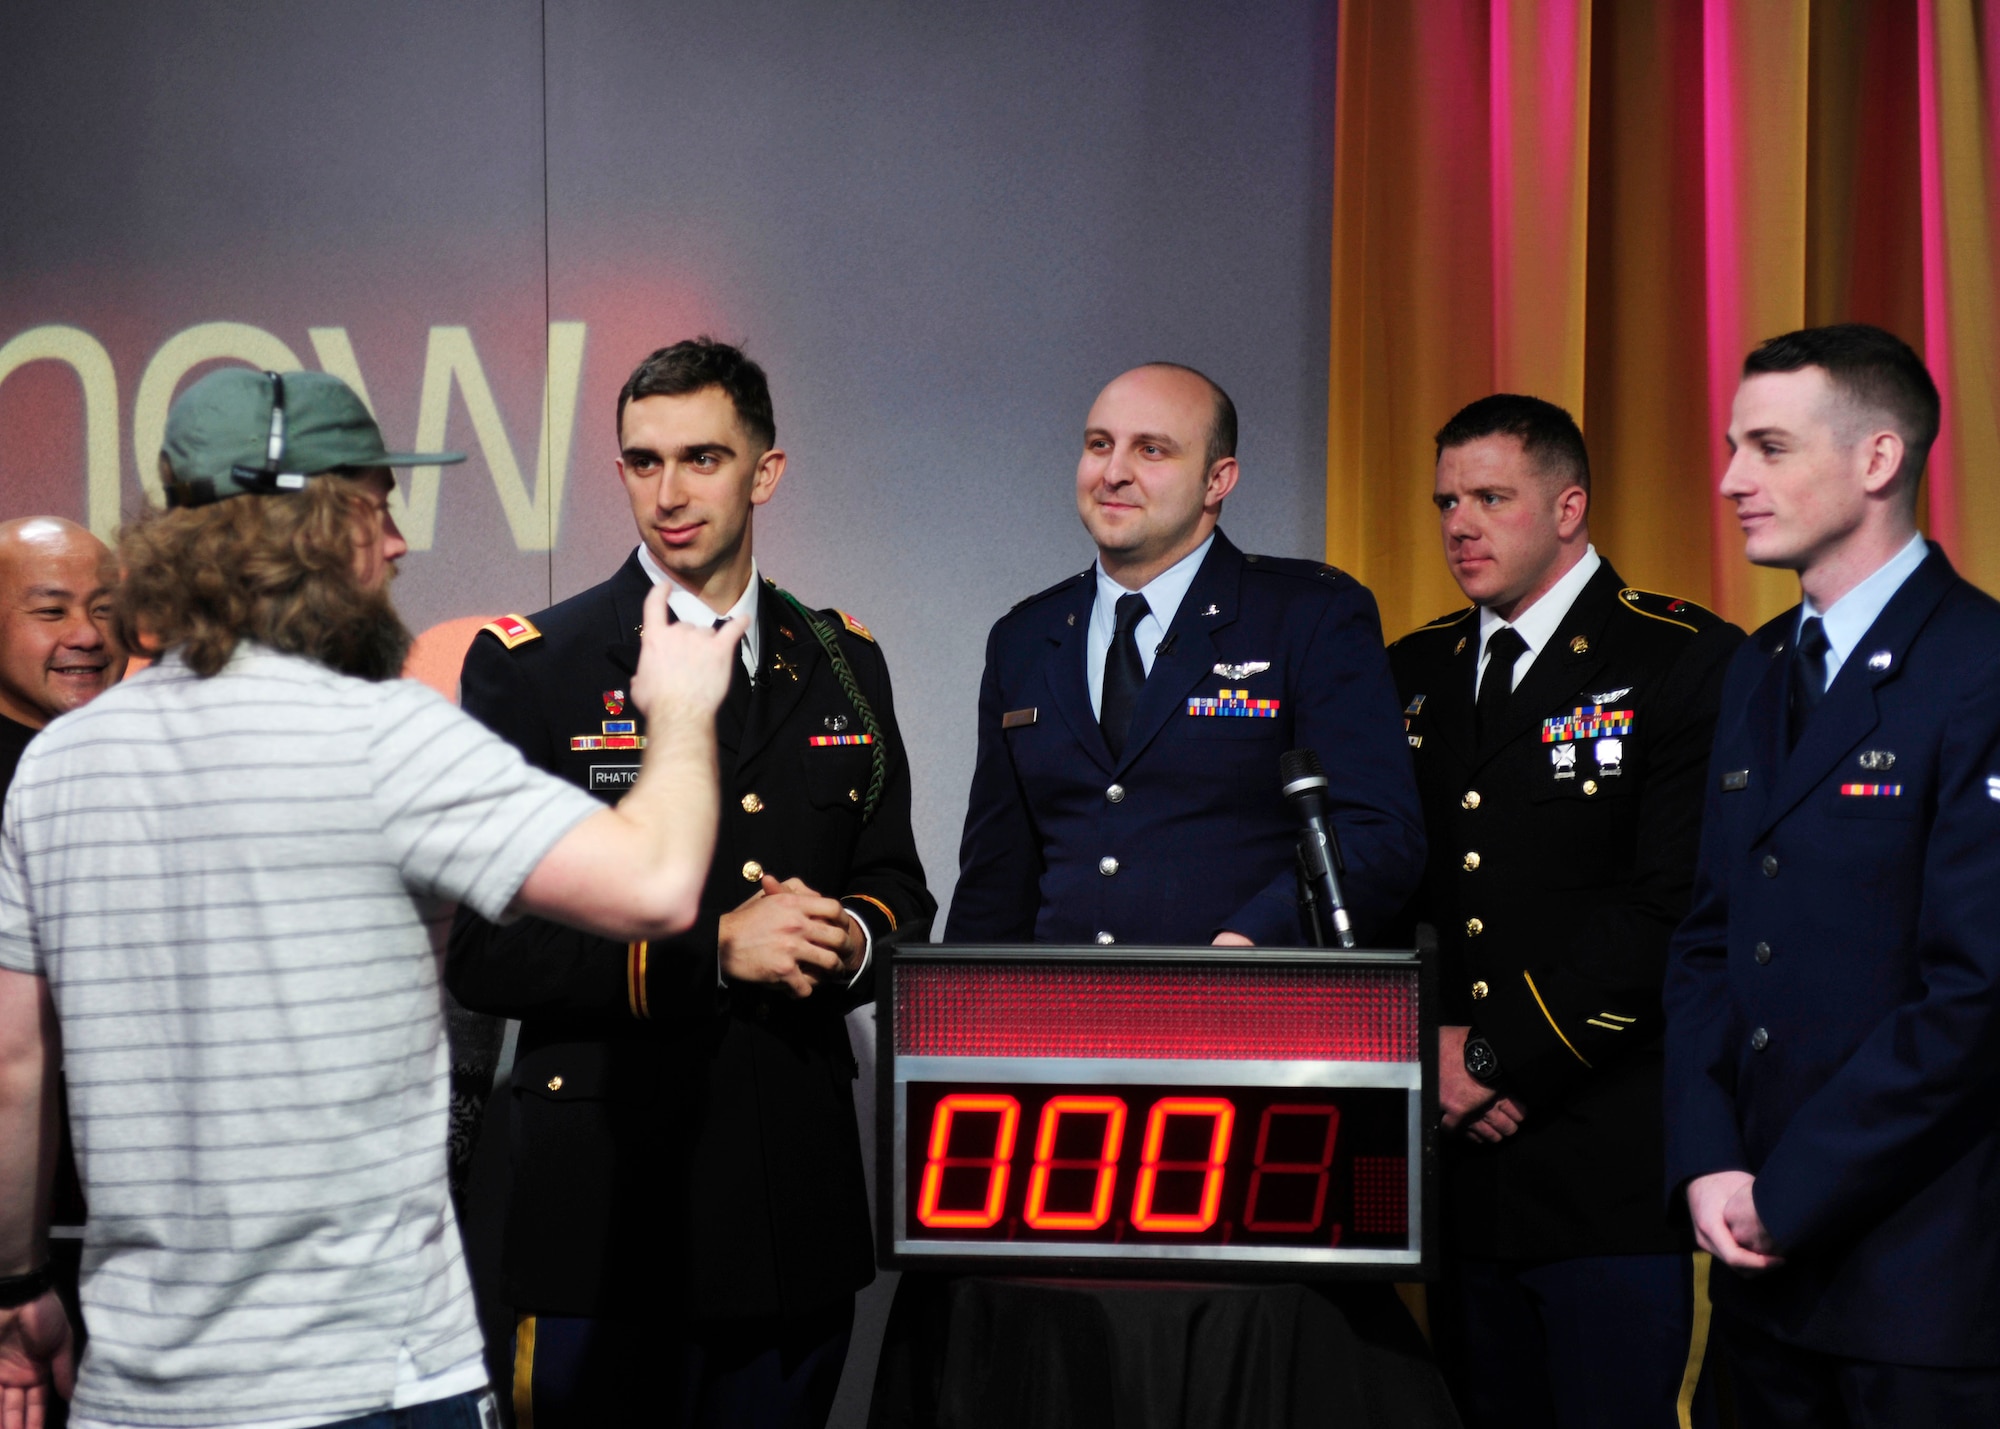 U.S. Army Soldiers and U.S. Air Force Airmen from Joint Base Lewis-McChord, Wash., listen as a King 5 “New Day” show camera operator explains rules of play prior to kicking off a round of on-air trivia, Feb. 28, 2017 in Seattle, Wash. During the game, servicemembers competed against a group of four civilians, and ultimately walked away with a win under their belts. (U.S. Air Force photo/Staff Sgt. Whitney Amstutz)